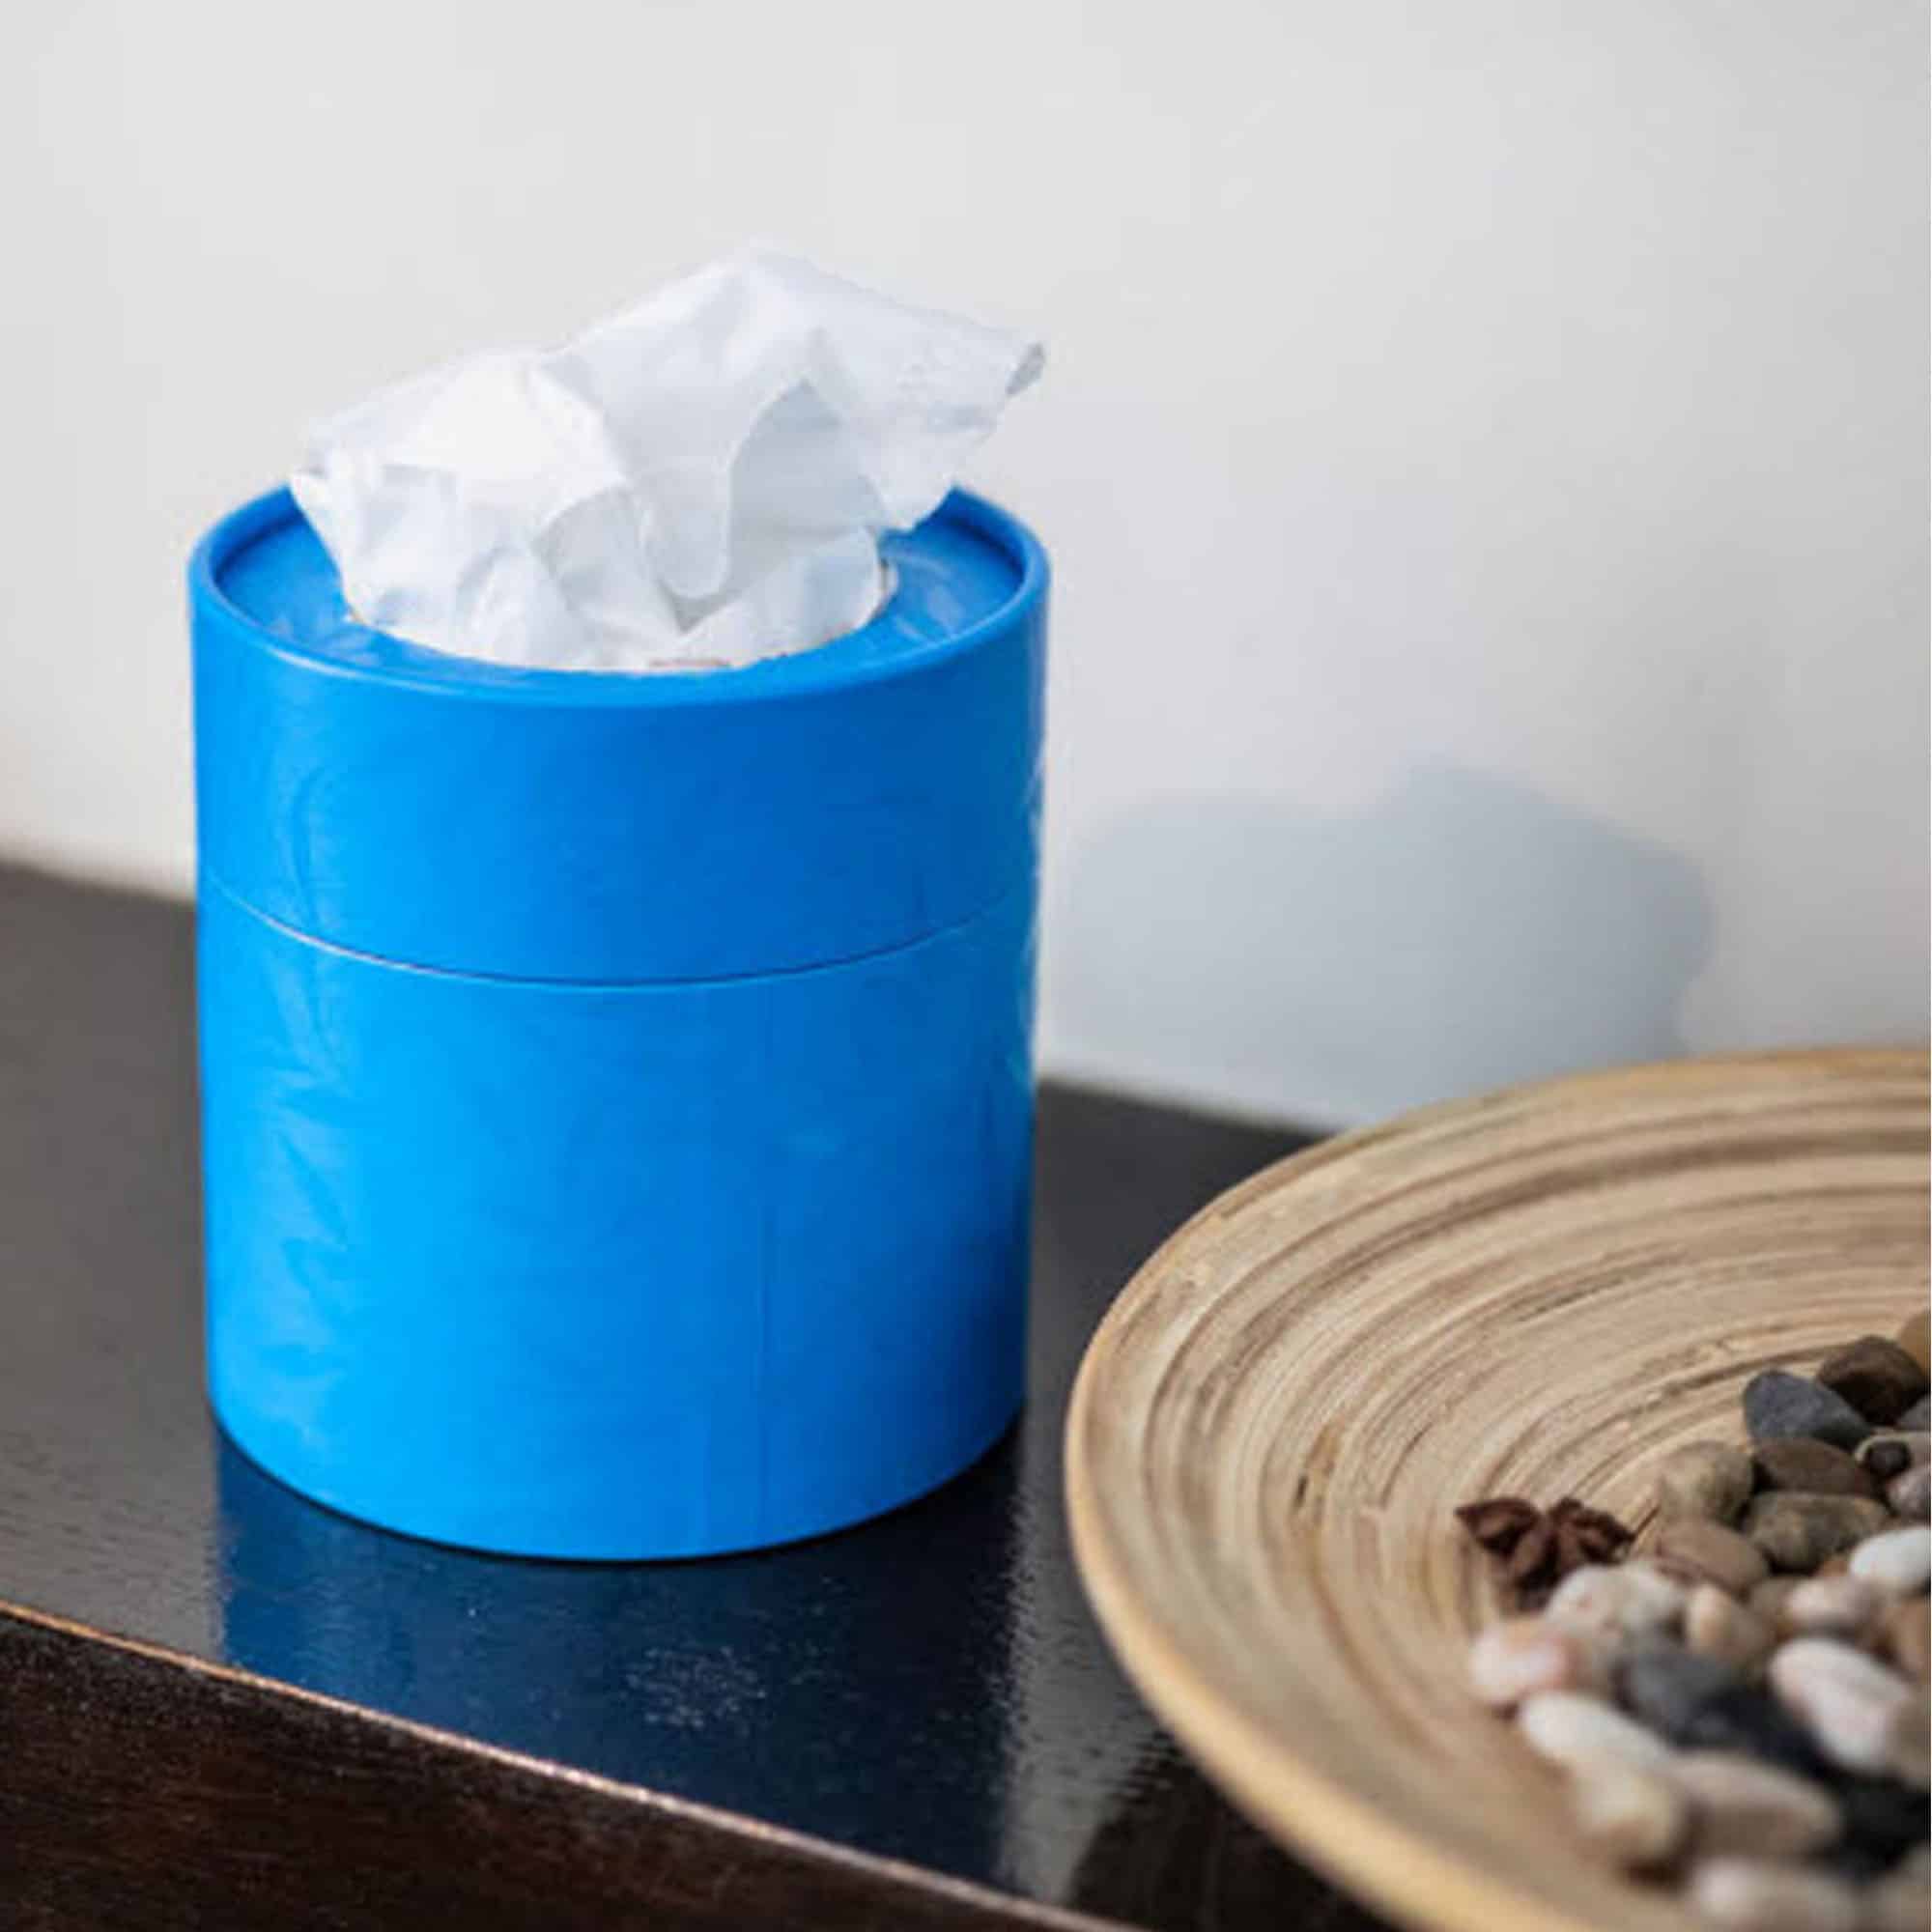 Premium Tissue Paper Products - Elevate Everyday Comfort and